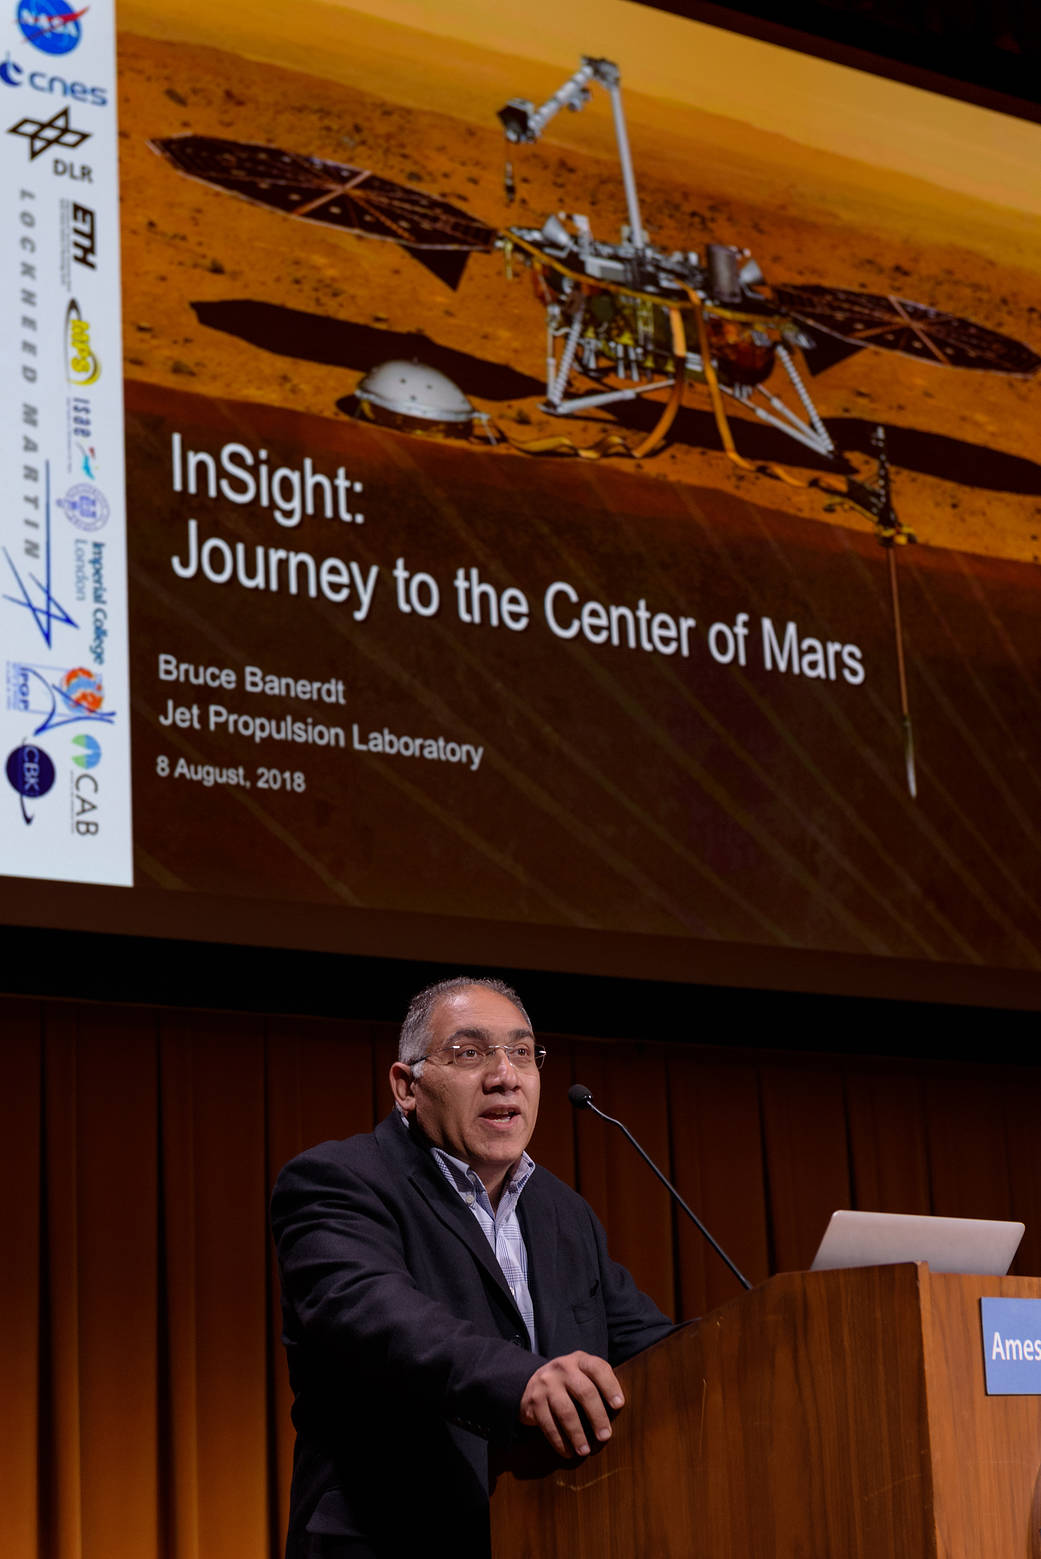 W. Bruce Banerdt - InSight: Journey to the Center of Mars